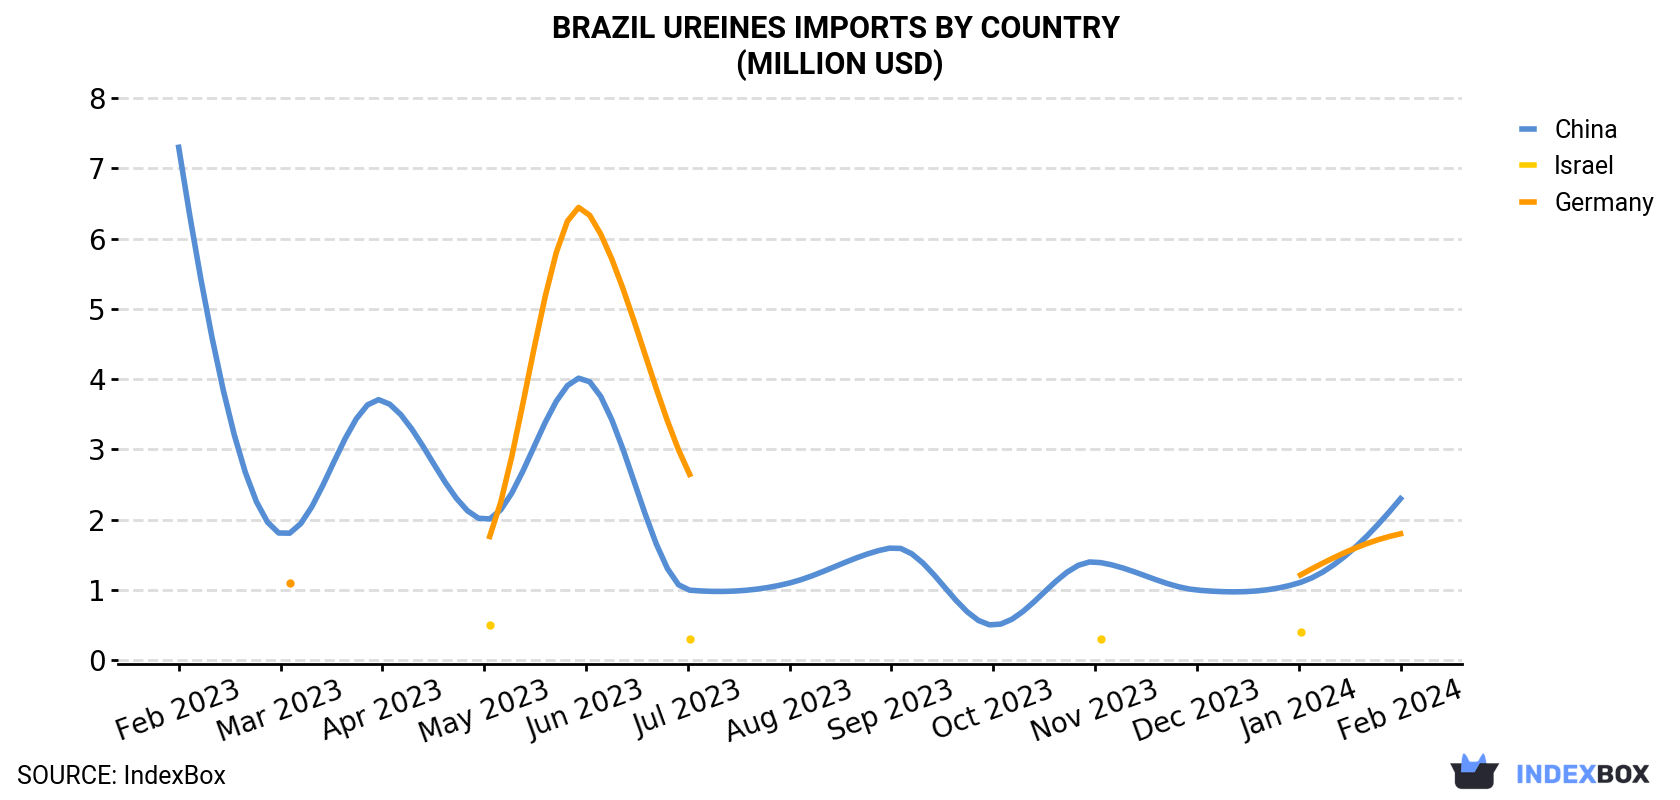 Brazil Ureines Imports By Country (Million USD)